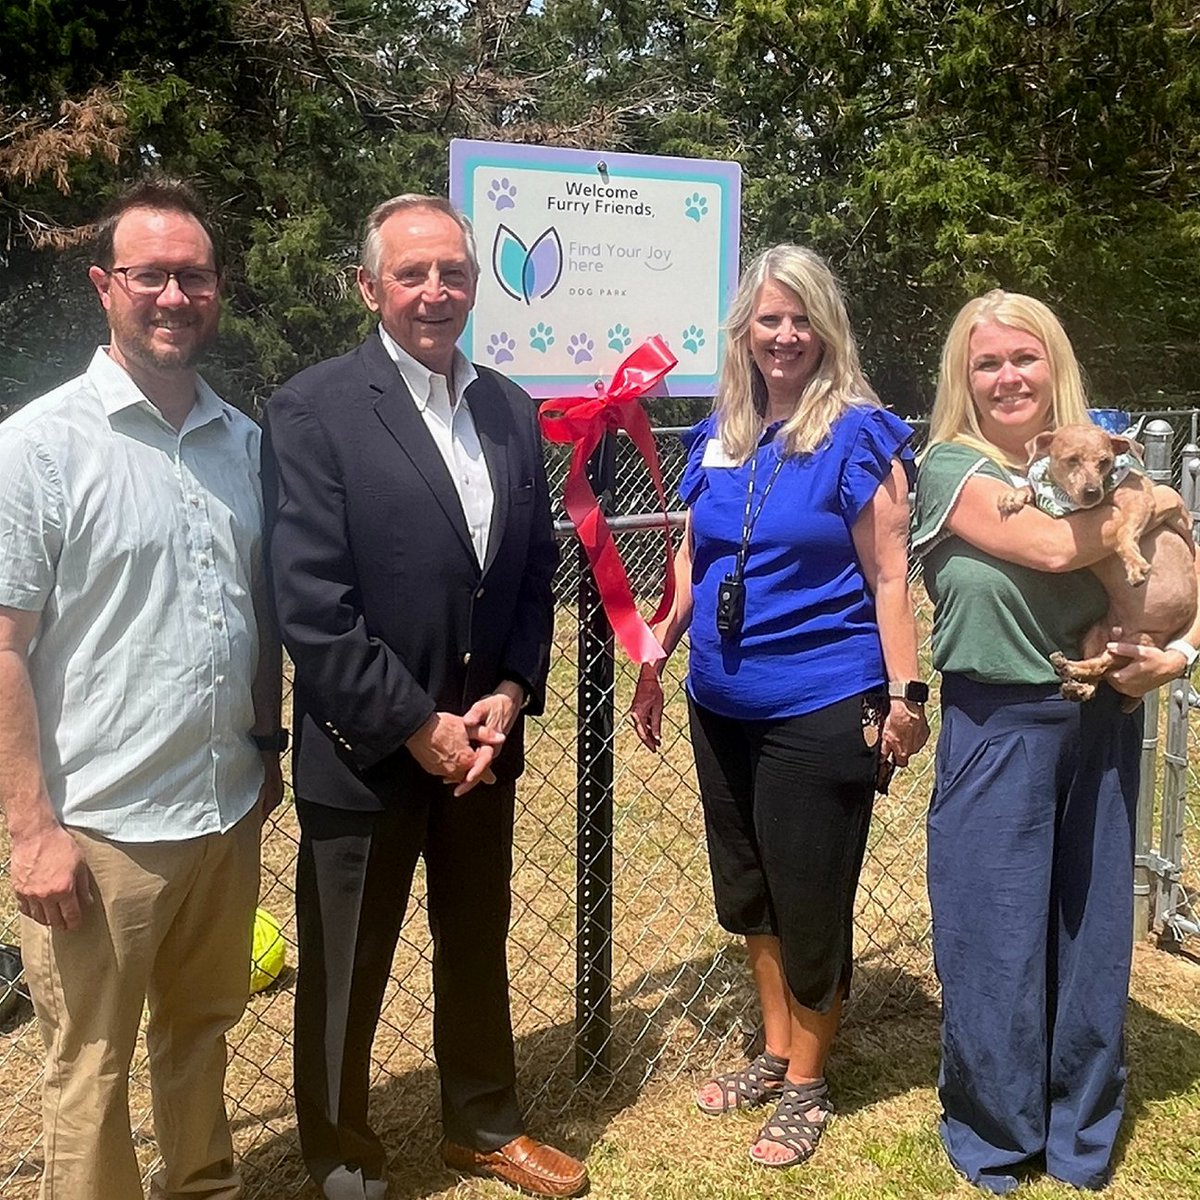 The Waterford on Highland Colony unveiled a project near and dear to their hearts: a dog park! “The dog park provides a safe space for our four-legged friends to play,” the ED said. #JoyfulBarks #SonidaSeniorLiving #SeniorLiving #SonidaJoyfulNotes #FindYourJoyHere